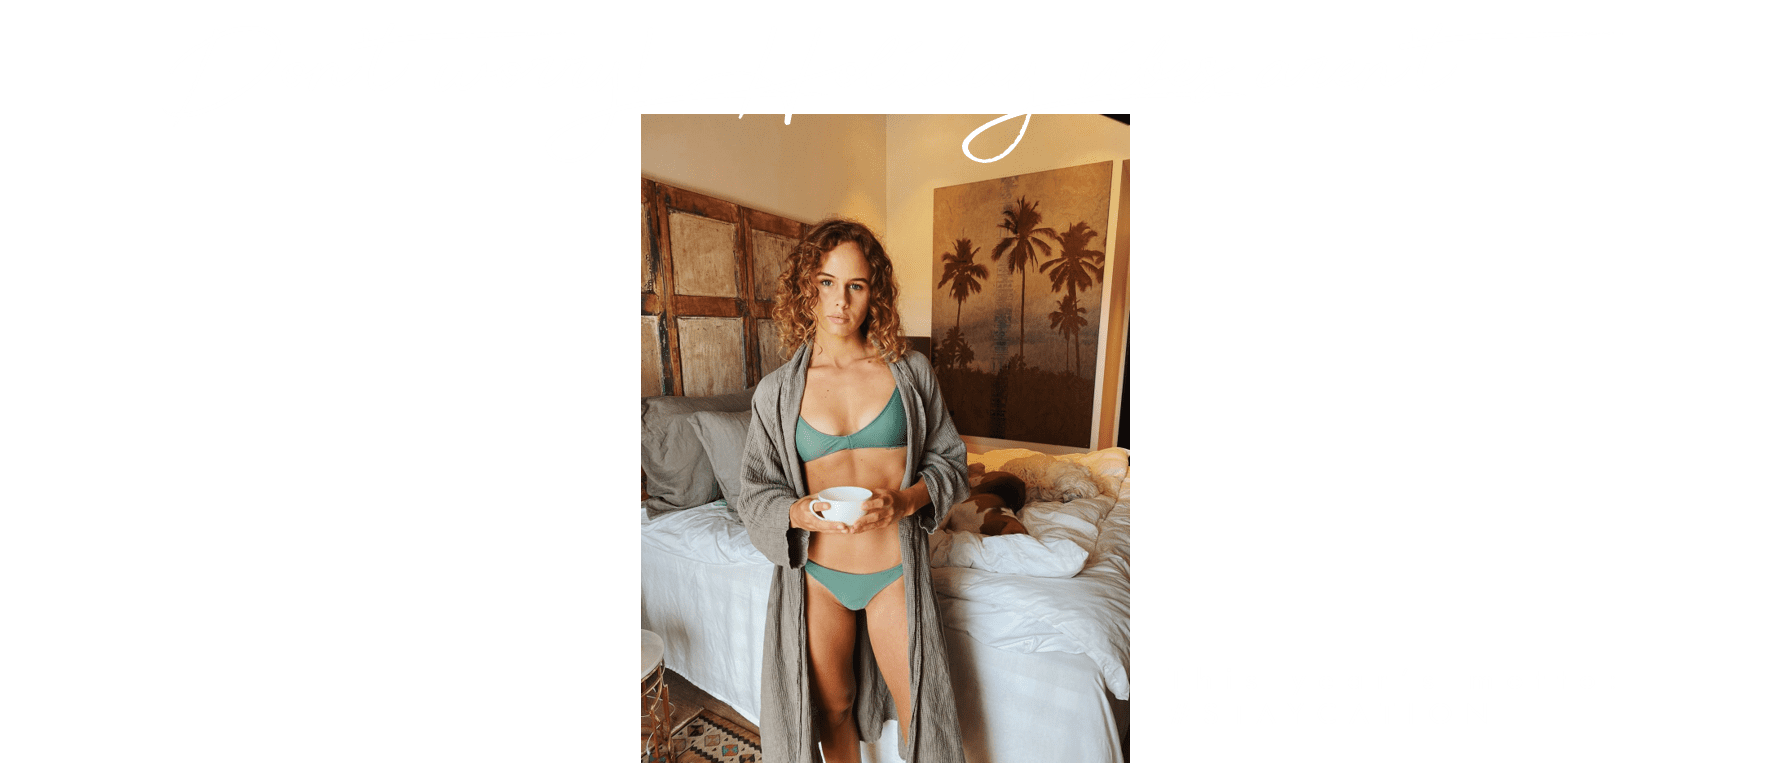 Holiday vibes at home in a bikini